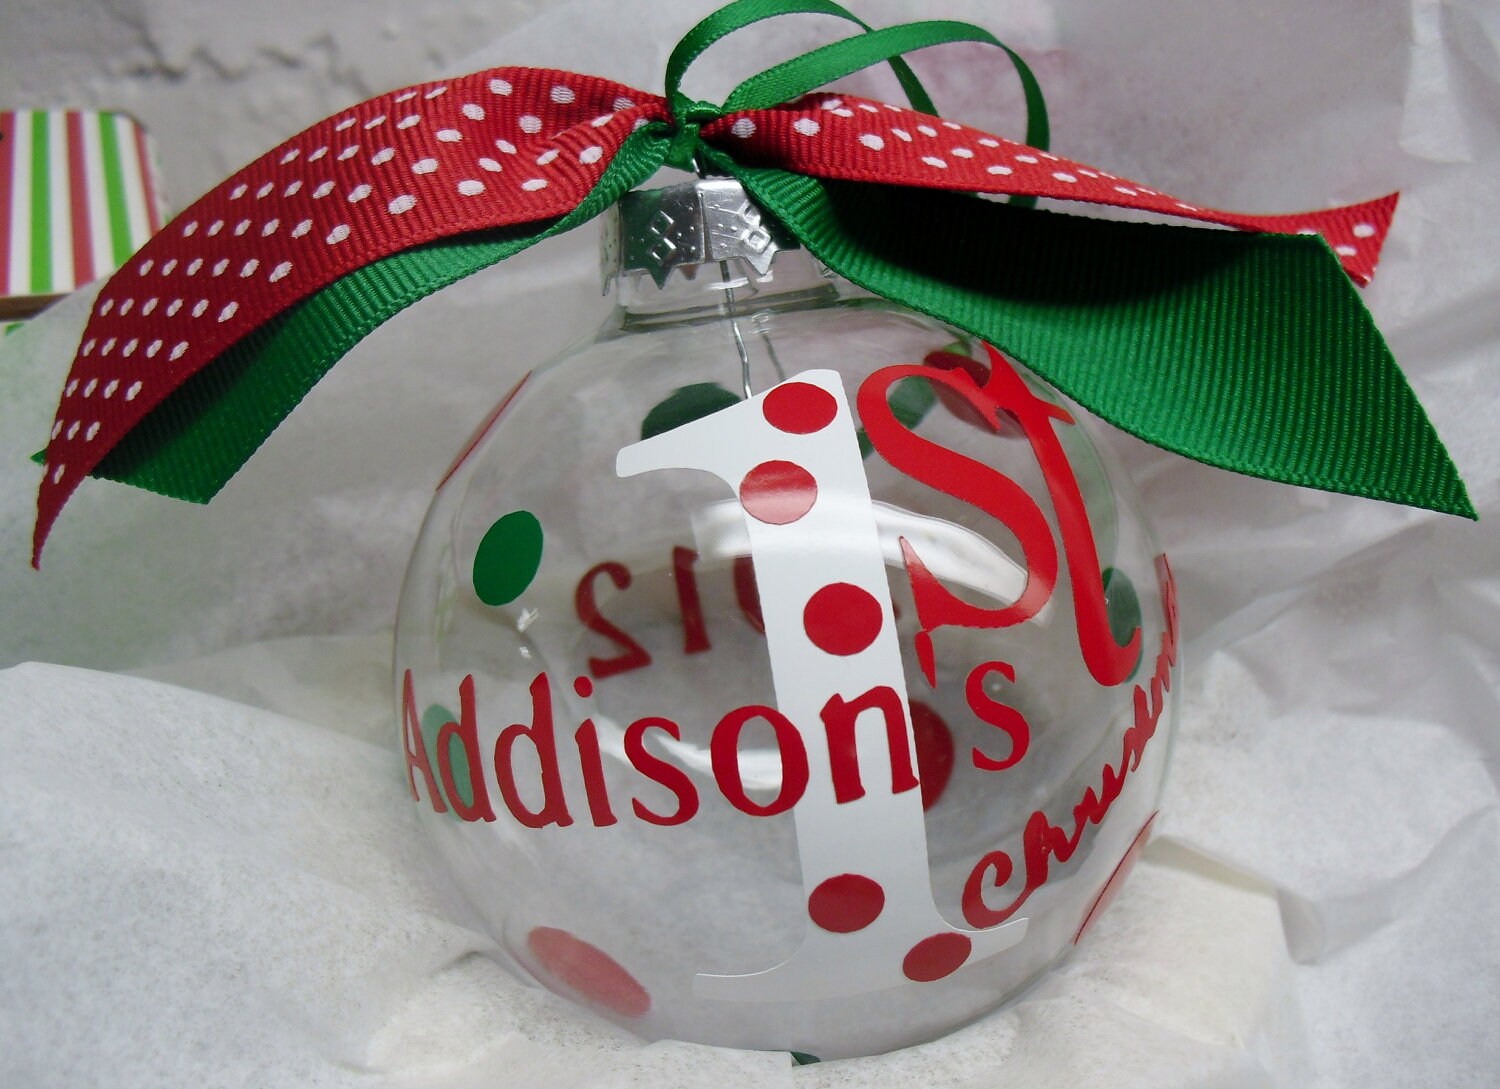 Etsy item spotlight Personalized Baby's First Christmas Ornament